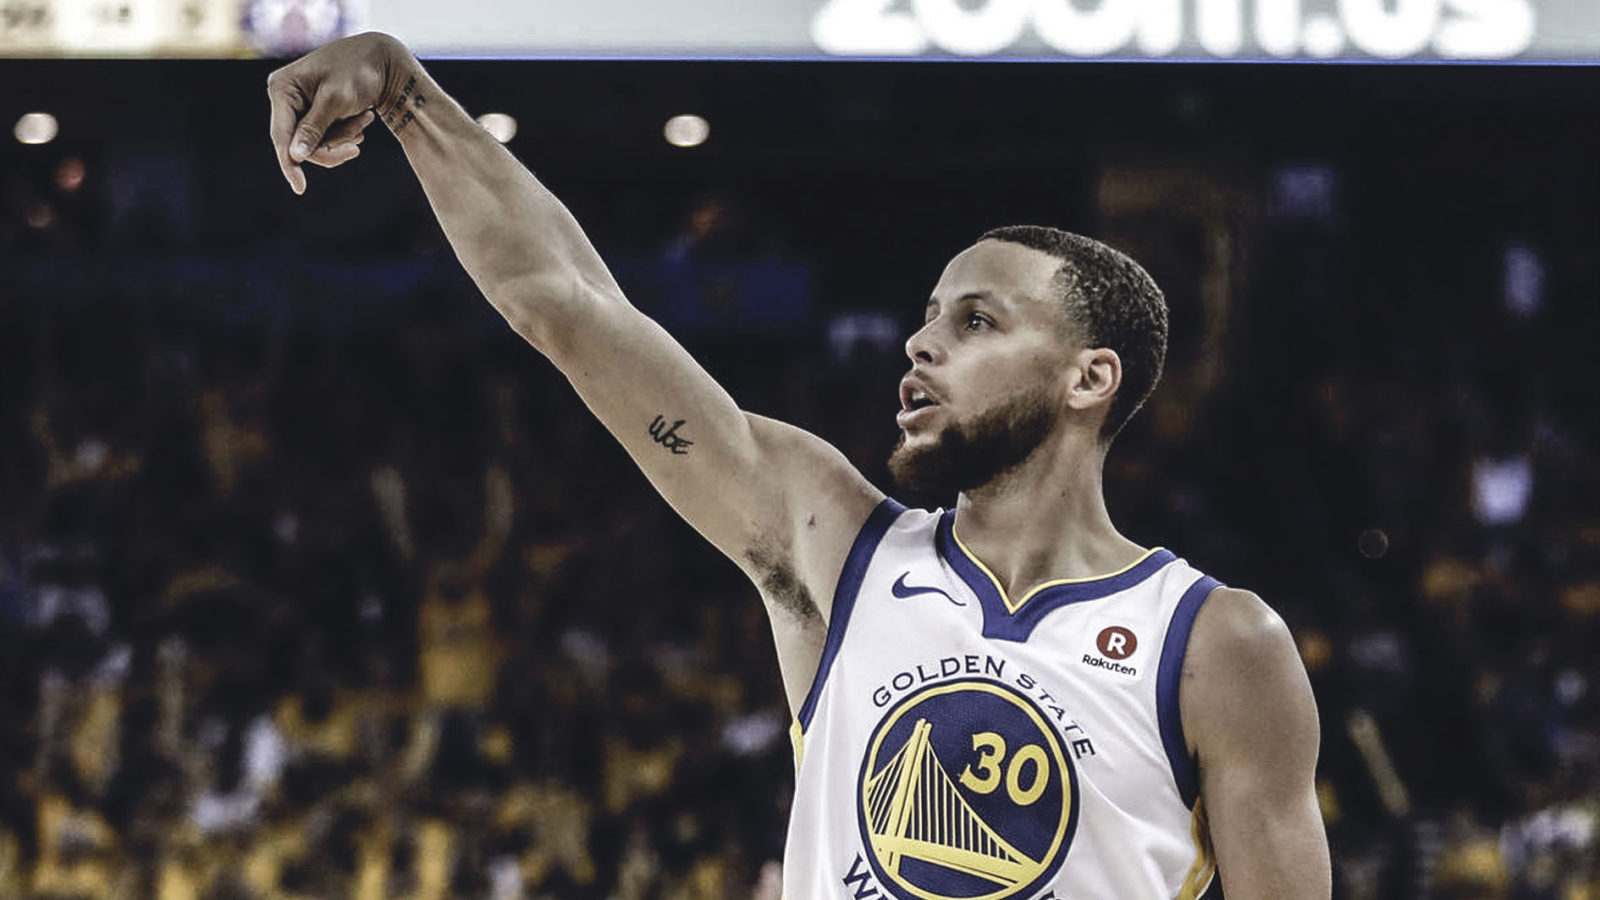 Arm and Stephen Curry Basketball Wallpapers on WallpaperDog